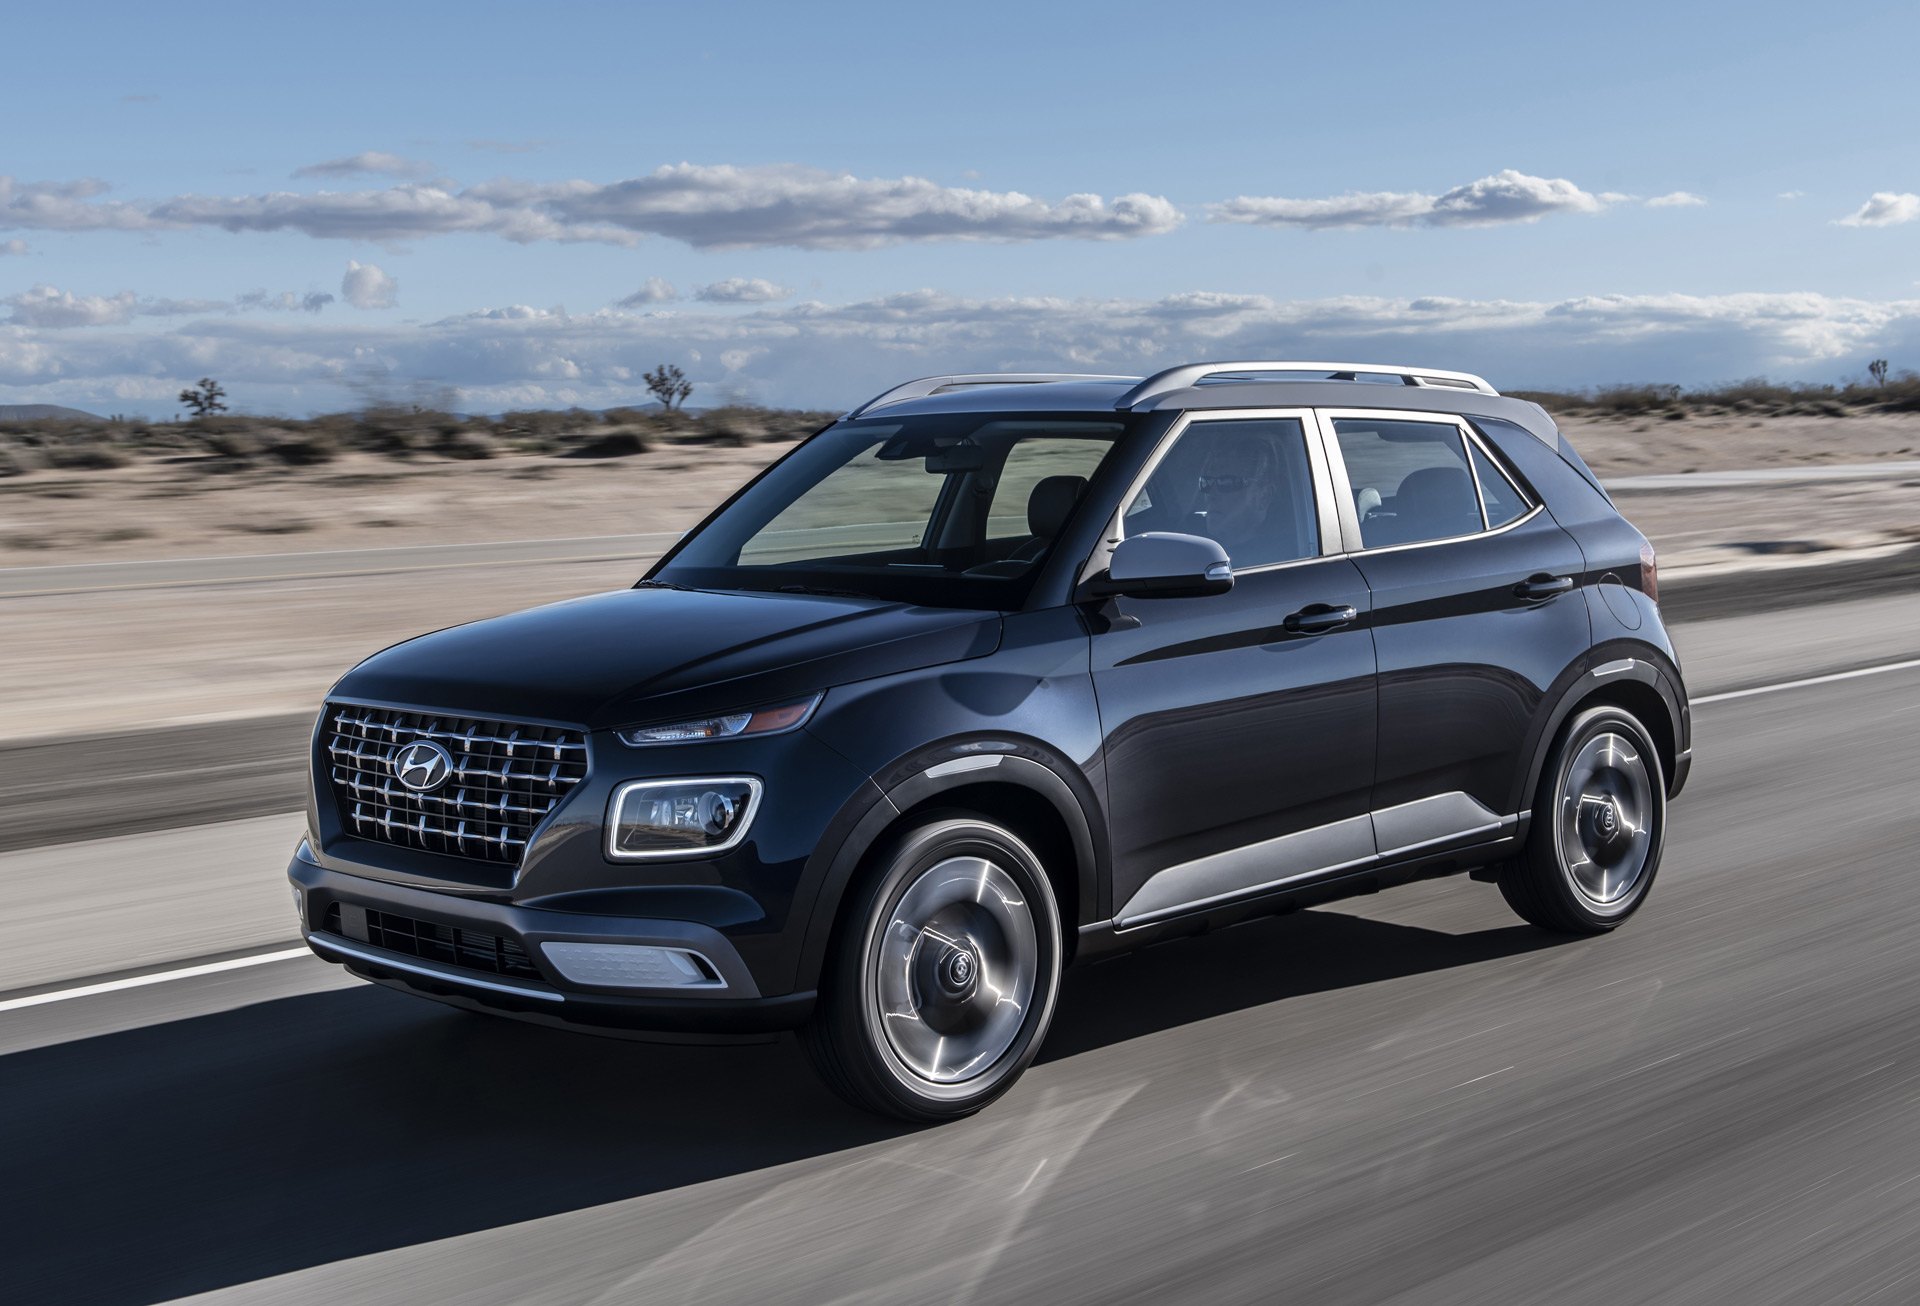 2020 Hyundai Venue Review, Ratings, Specs, Prices, and Photos - The Car